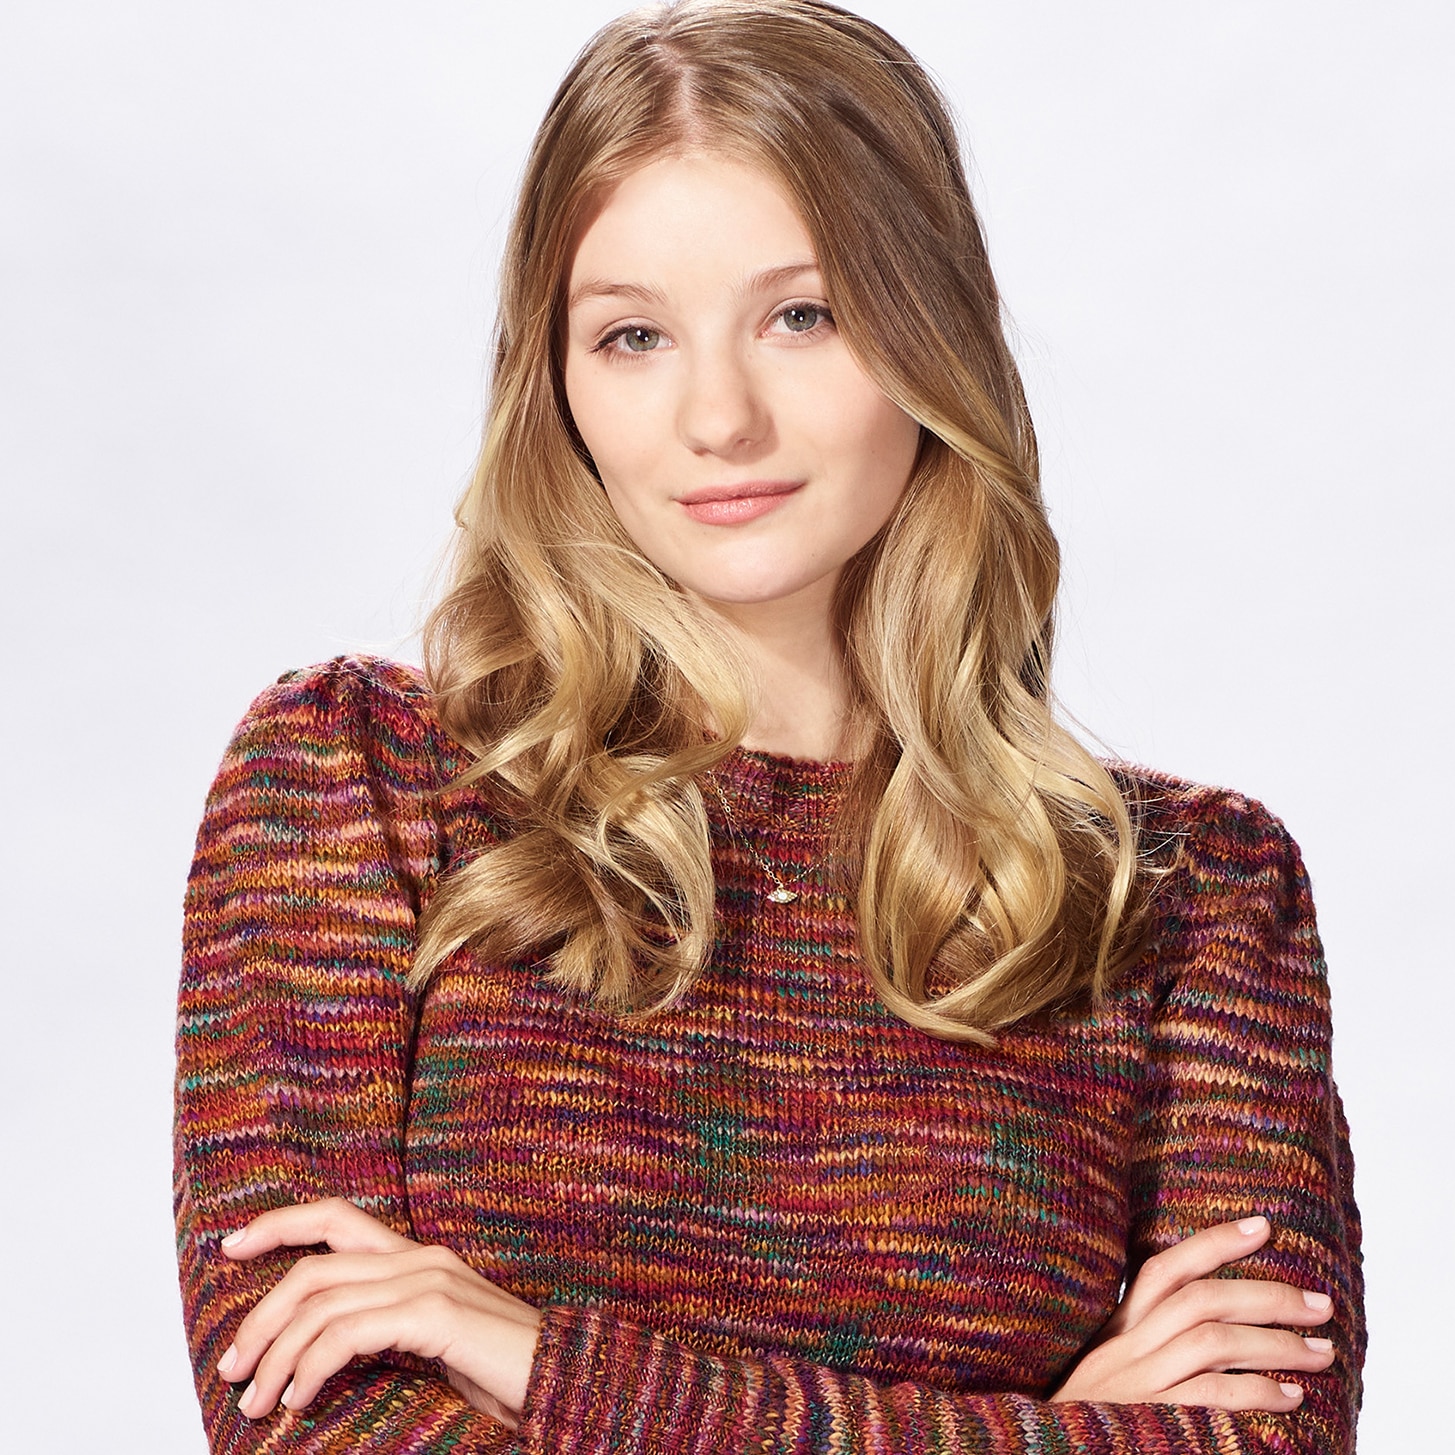 Allie Horton: Days of our Lives Character - USANetwork.com.